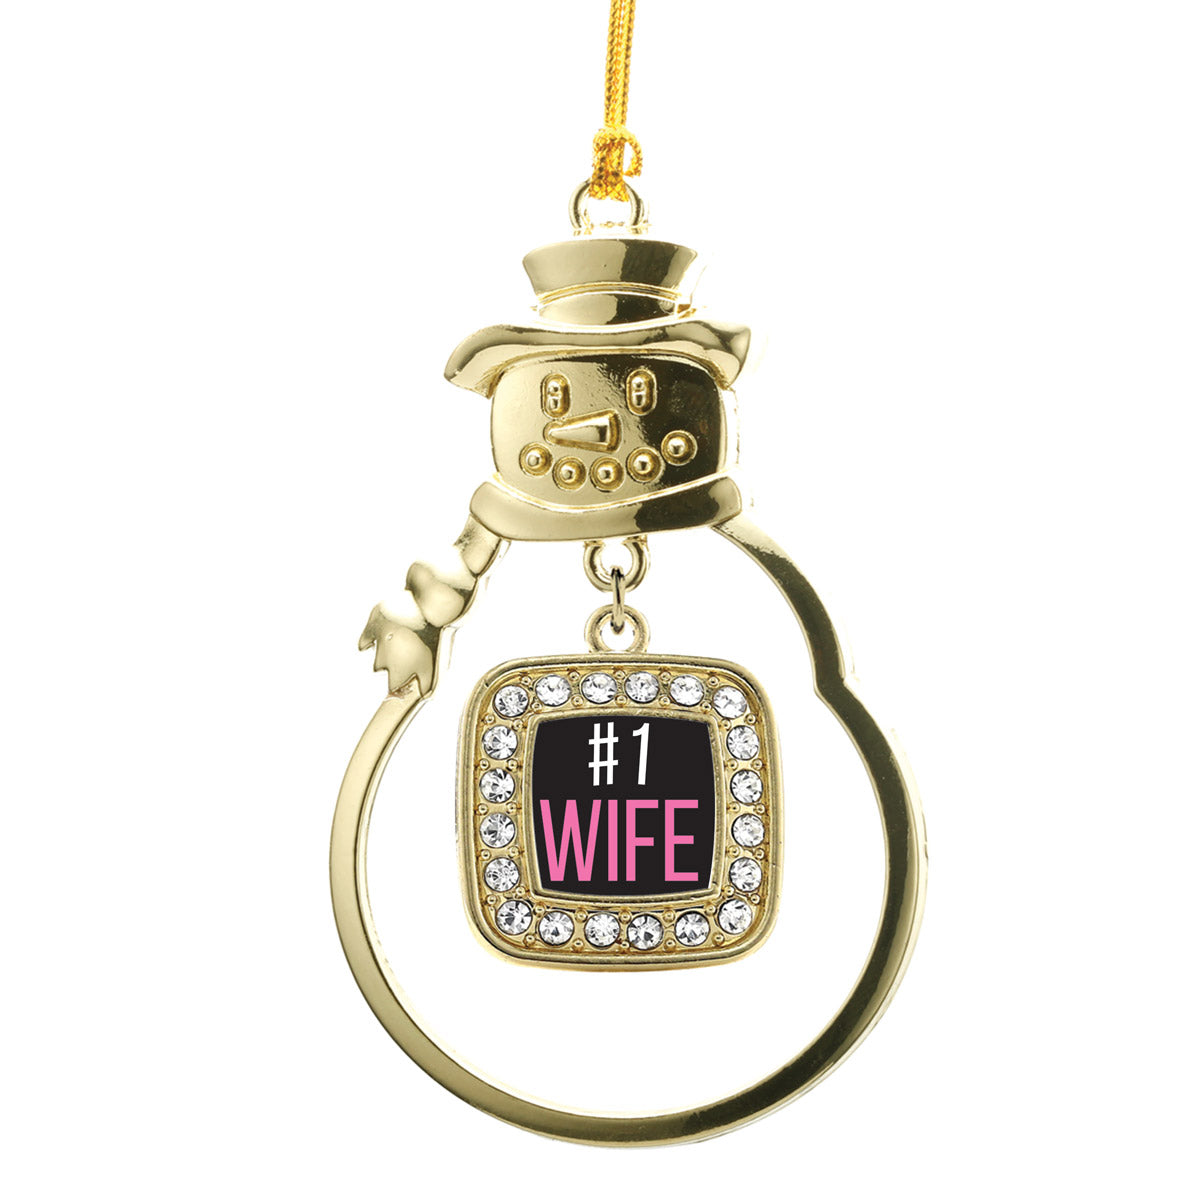 Gold #1 Wife Square Charm Snowman Ornament